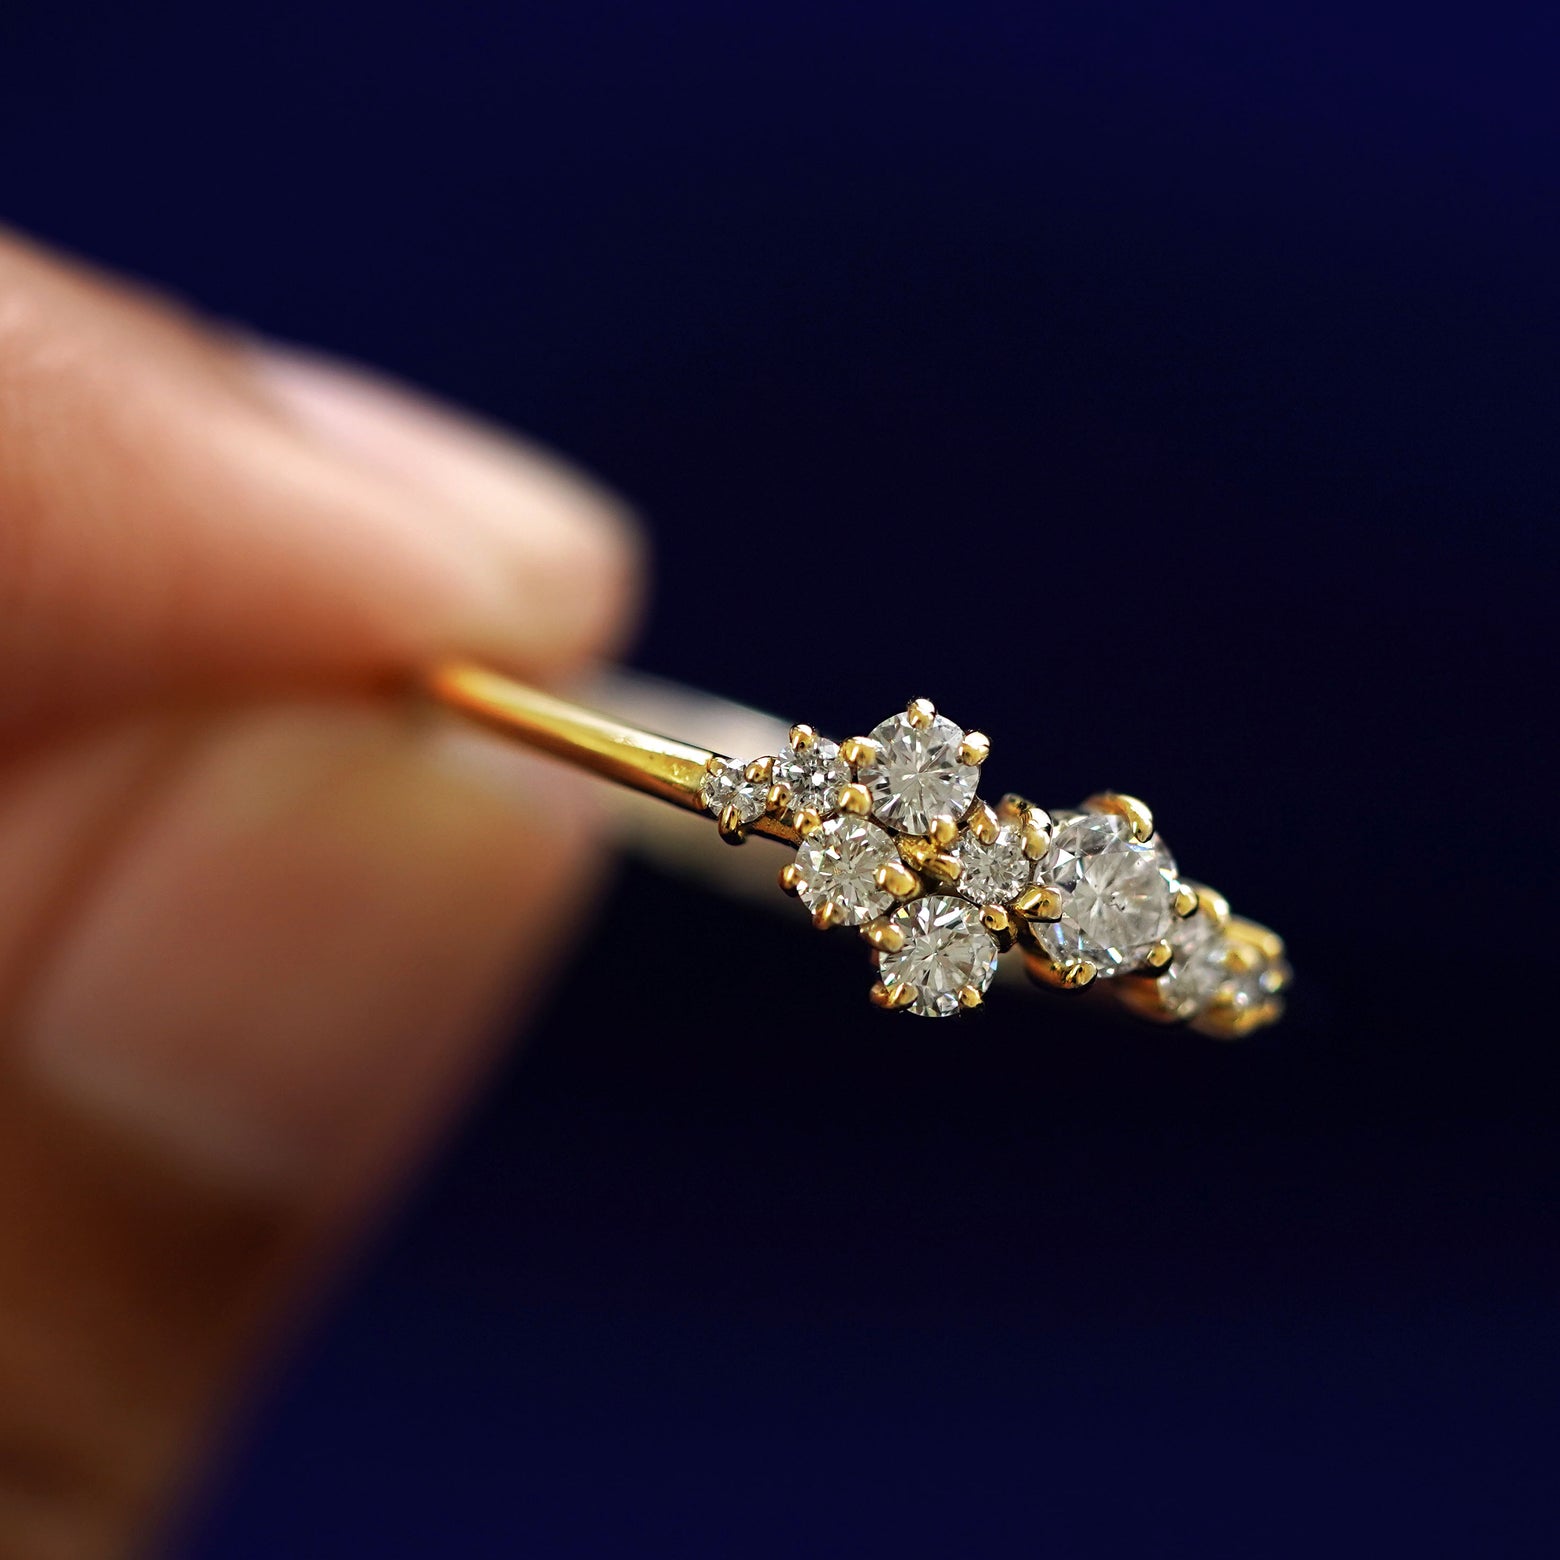 A model holding a Diamond Cluster Ring tilted to show the detail of the diamond cluster